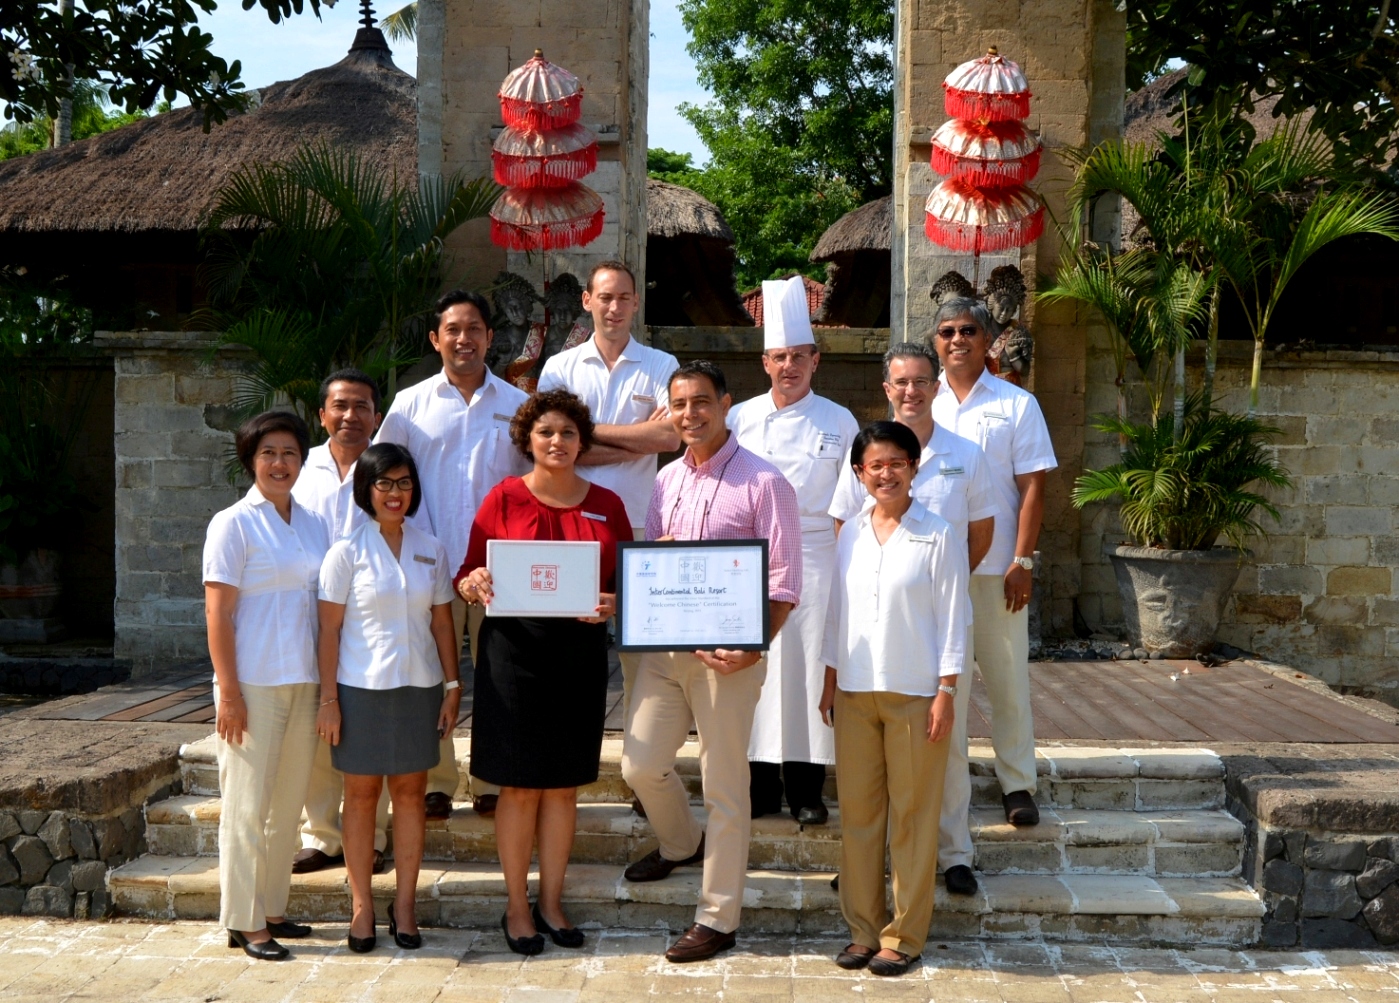 INTERCONTINENTAL BALI RESORT PROUD TO DECLARE ITS SUPPORT AND READINESS FOR CHINESE VISITORS